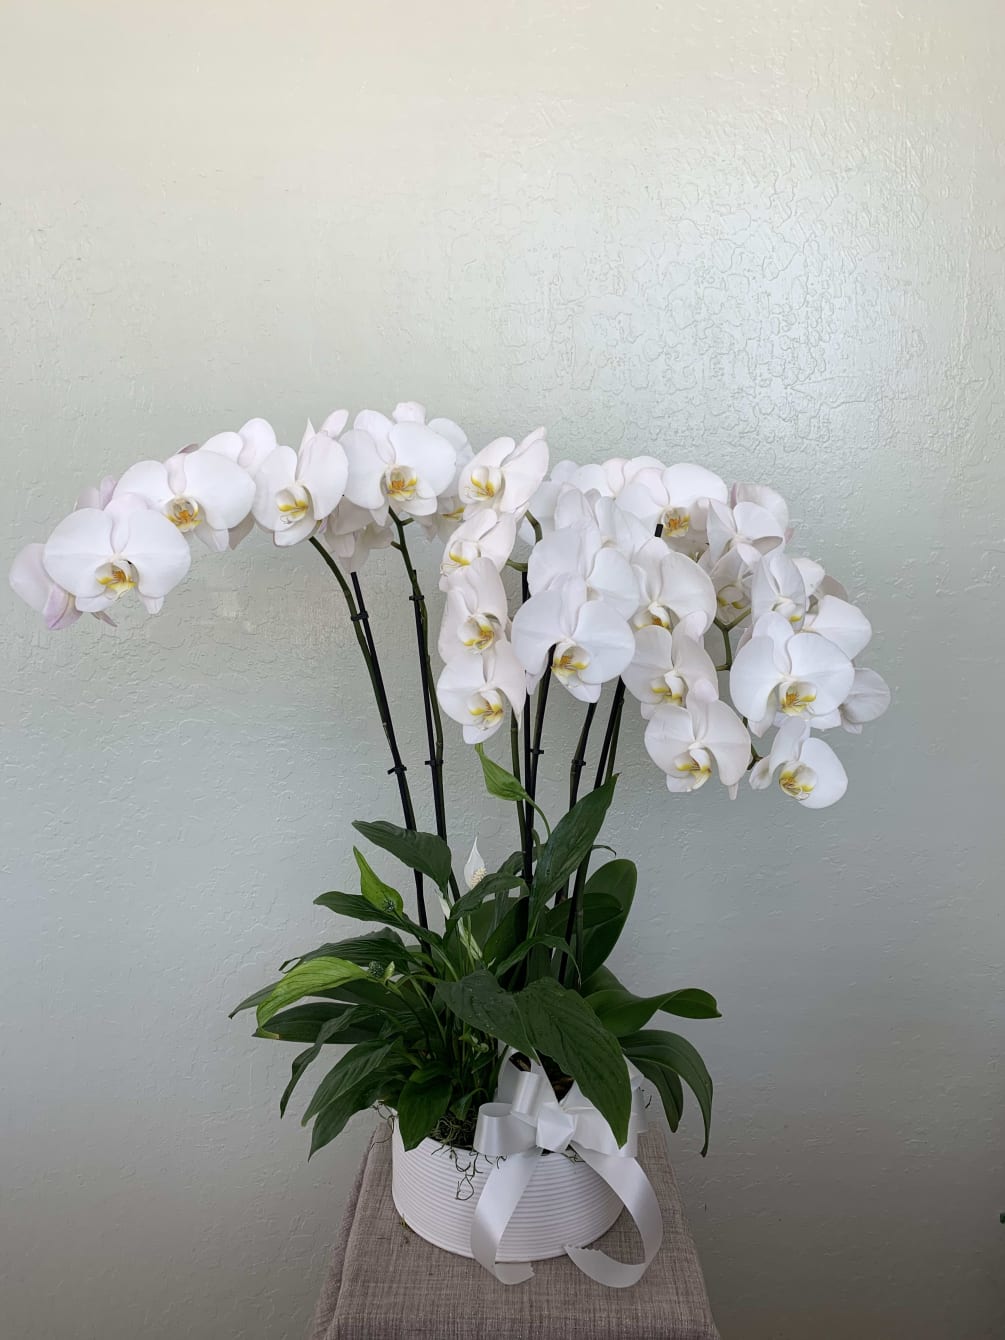 With their delicate beauty, orchids create a sense of calm in any